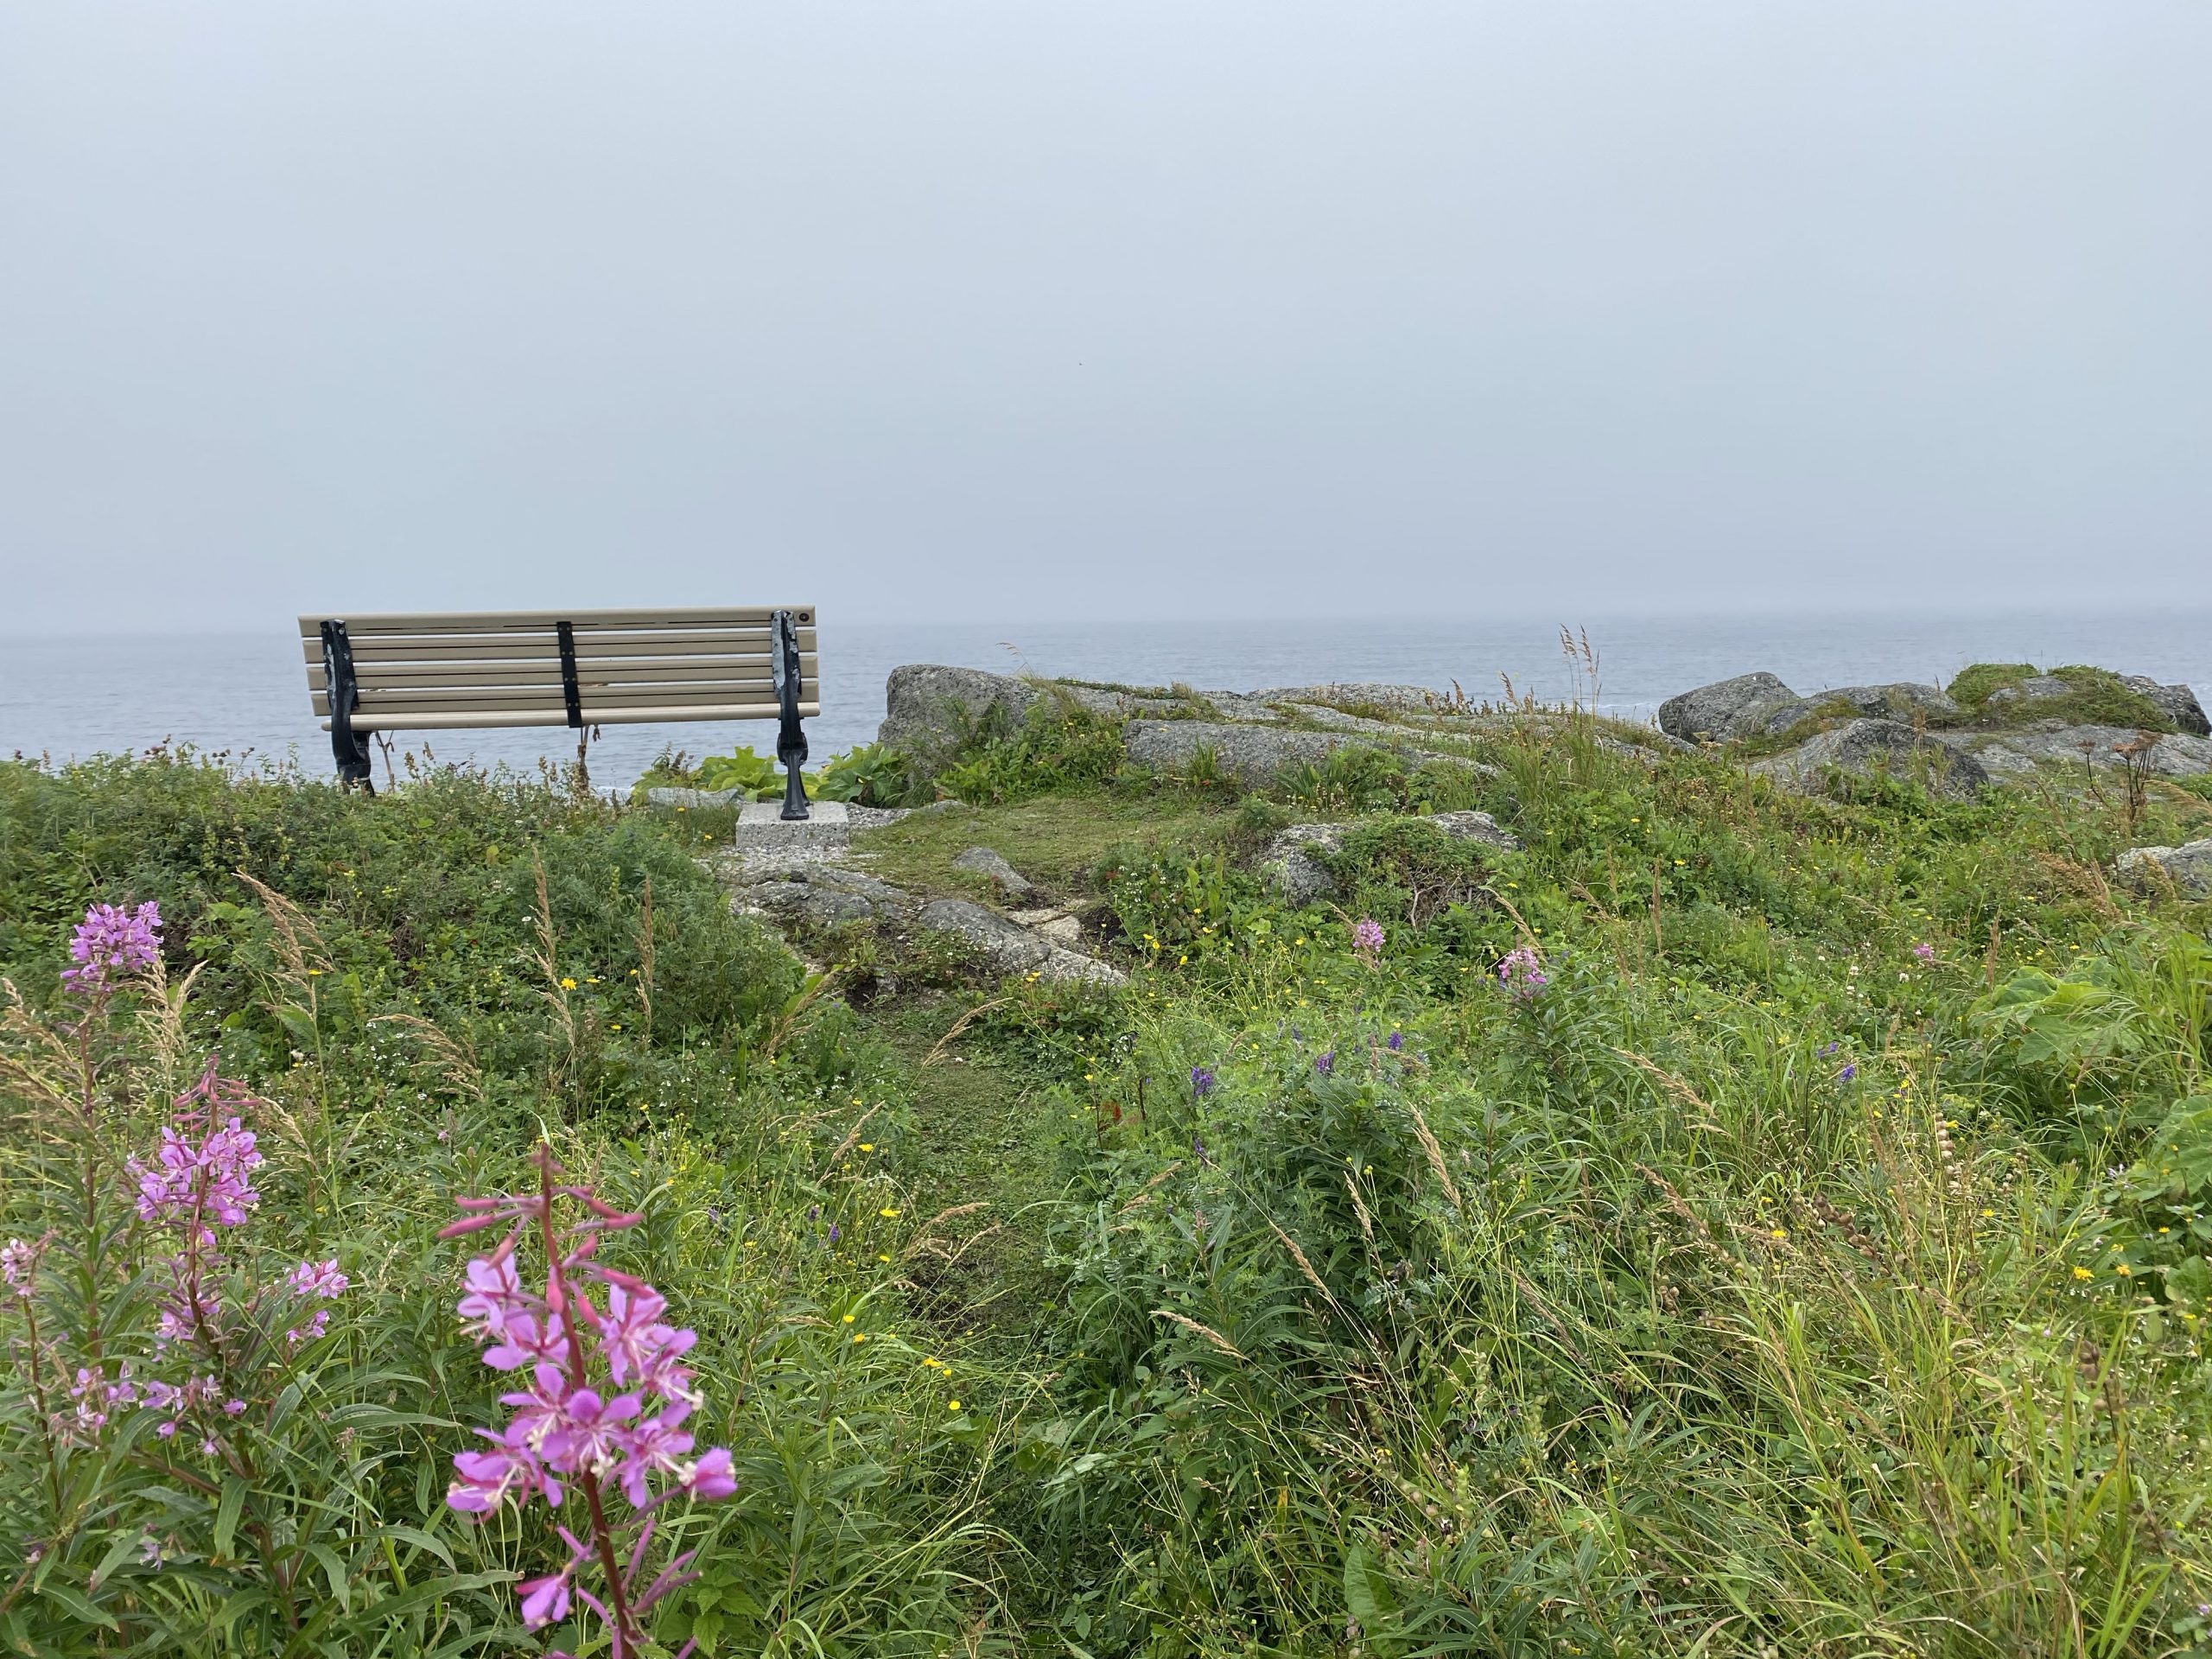 The lookout bench at Fox Point (or Fisherman’s Point) near St. Anthony, Newfoundland.